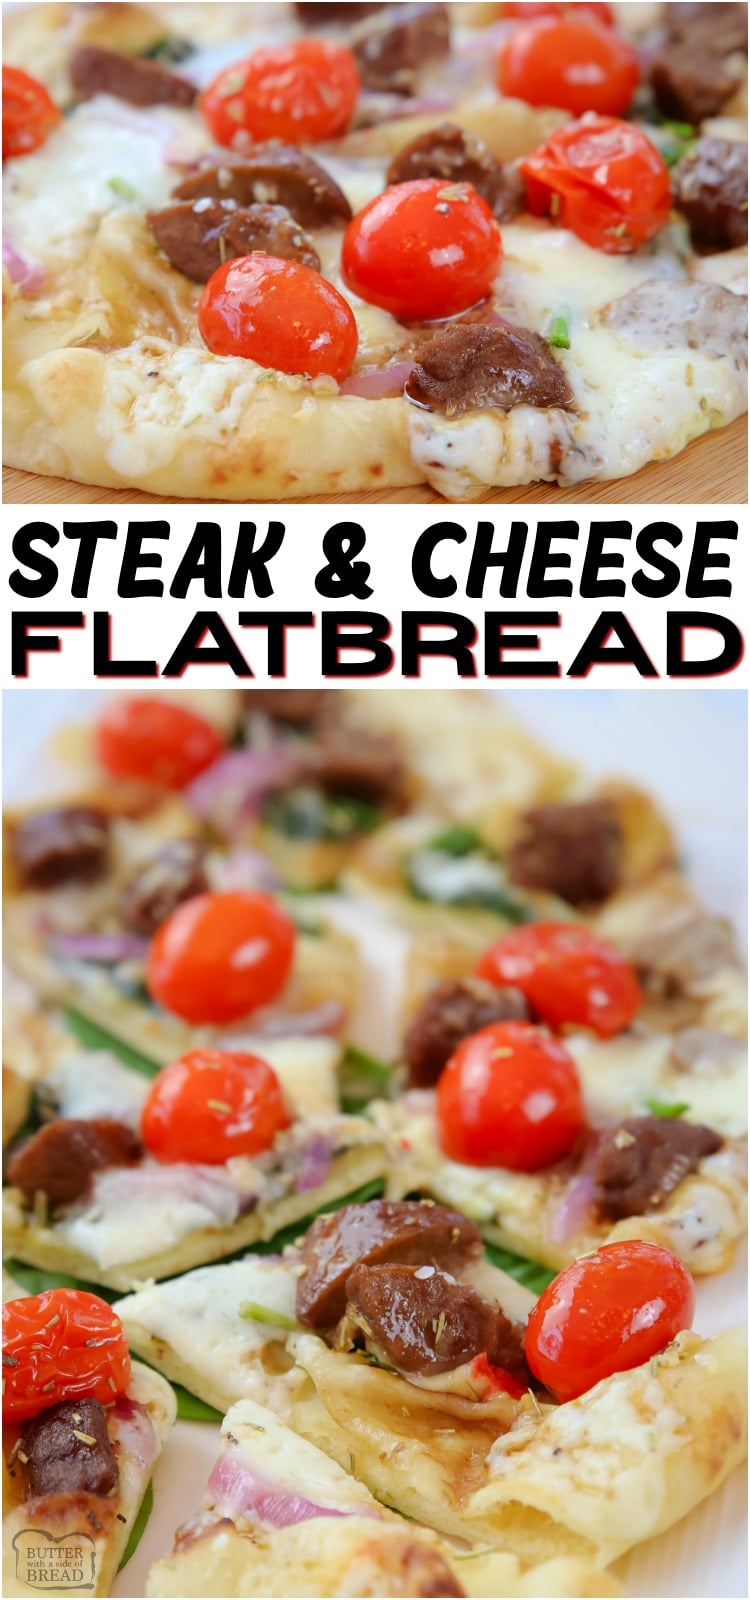 Steak and Cheese Flatbread perfect for appetizers or an easy dinner! Soft flatbread topped with steak bites, cheese, cherry tomatoes, red onion and fresh spinach.